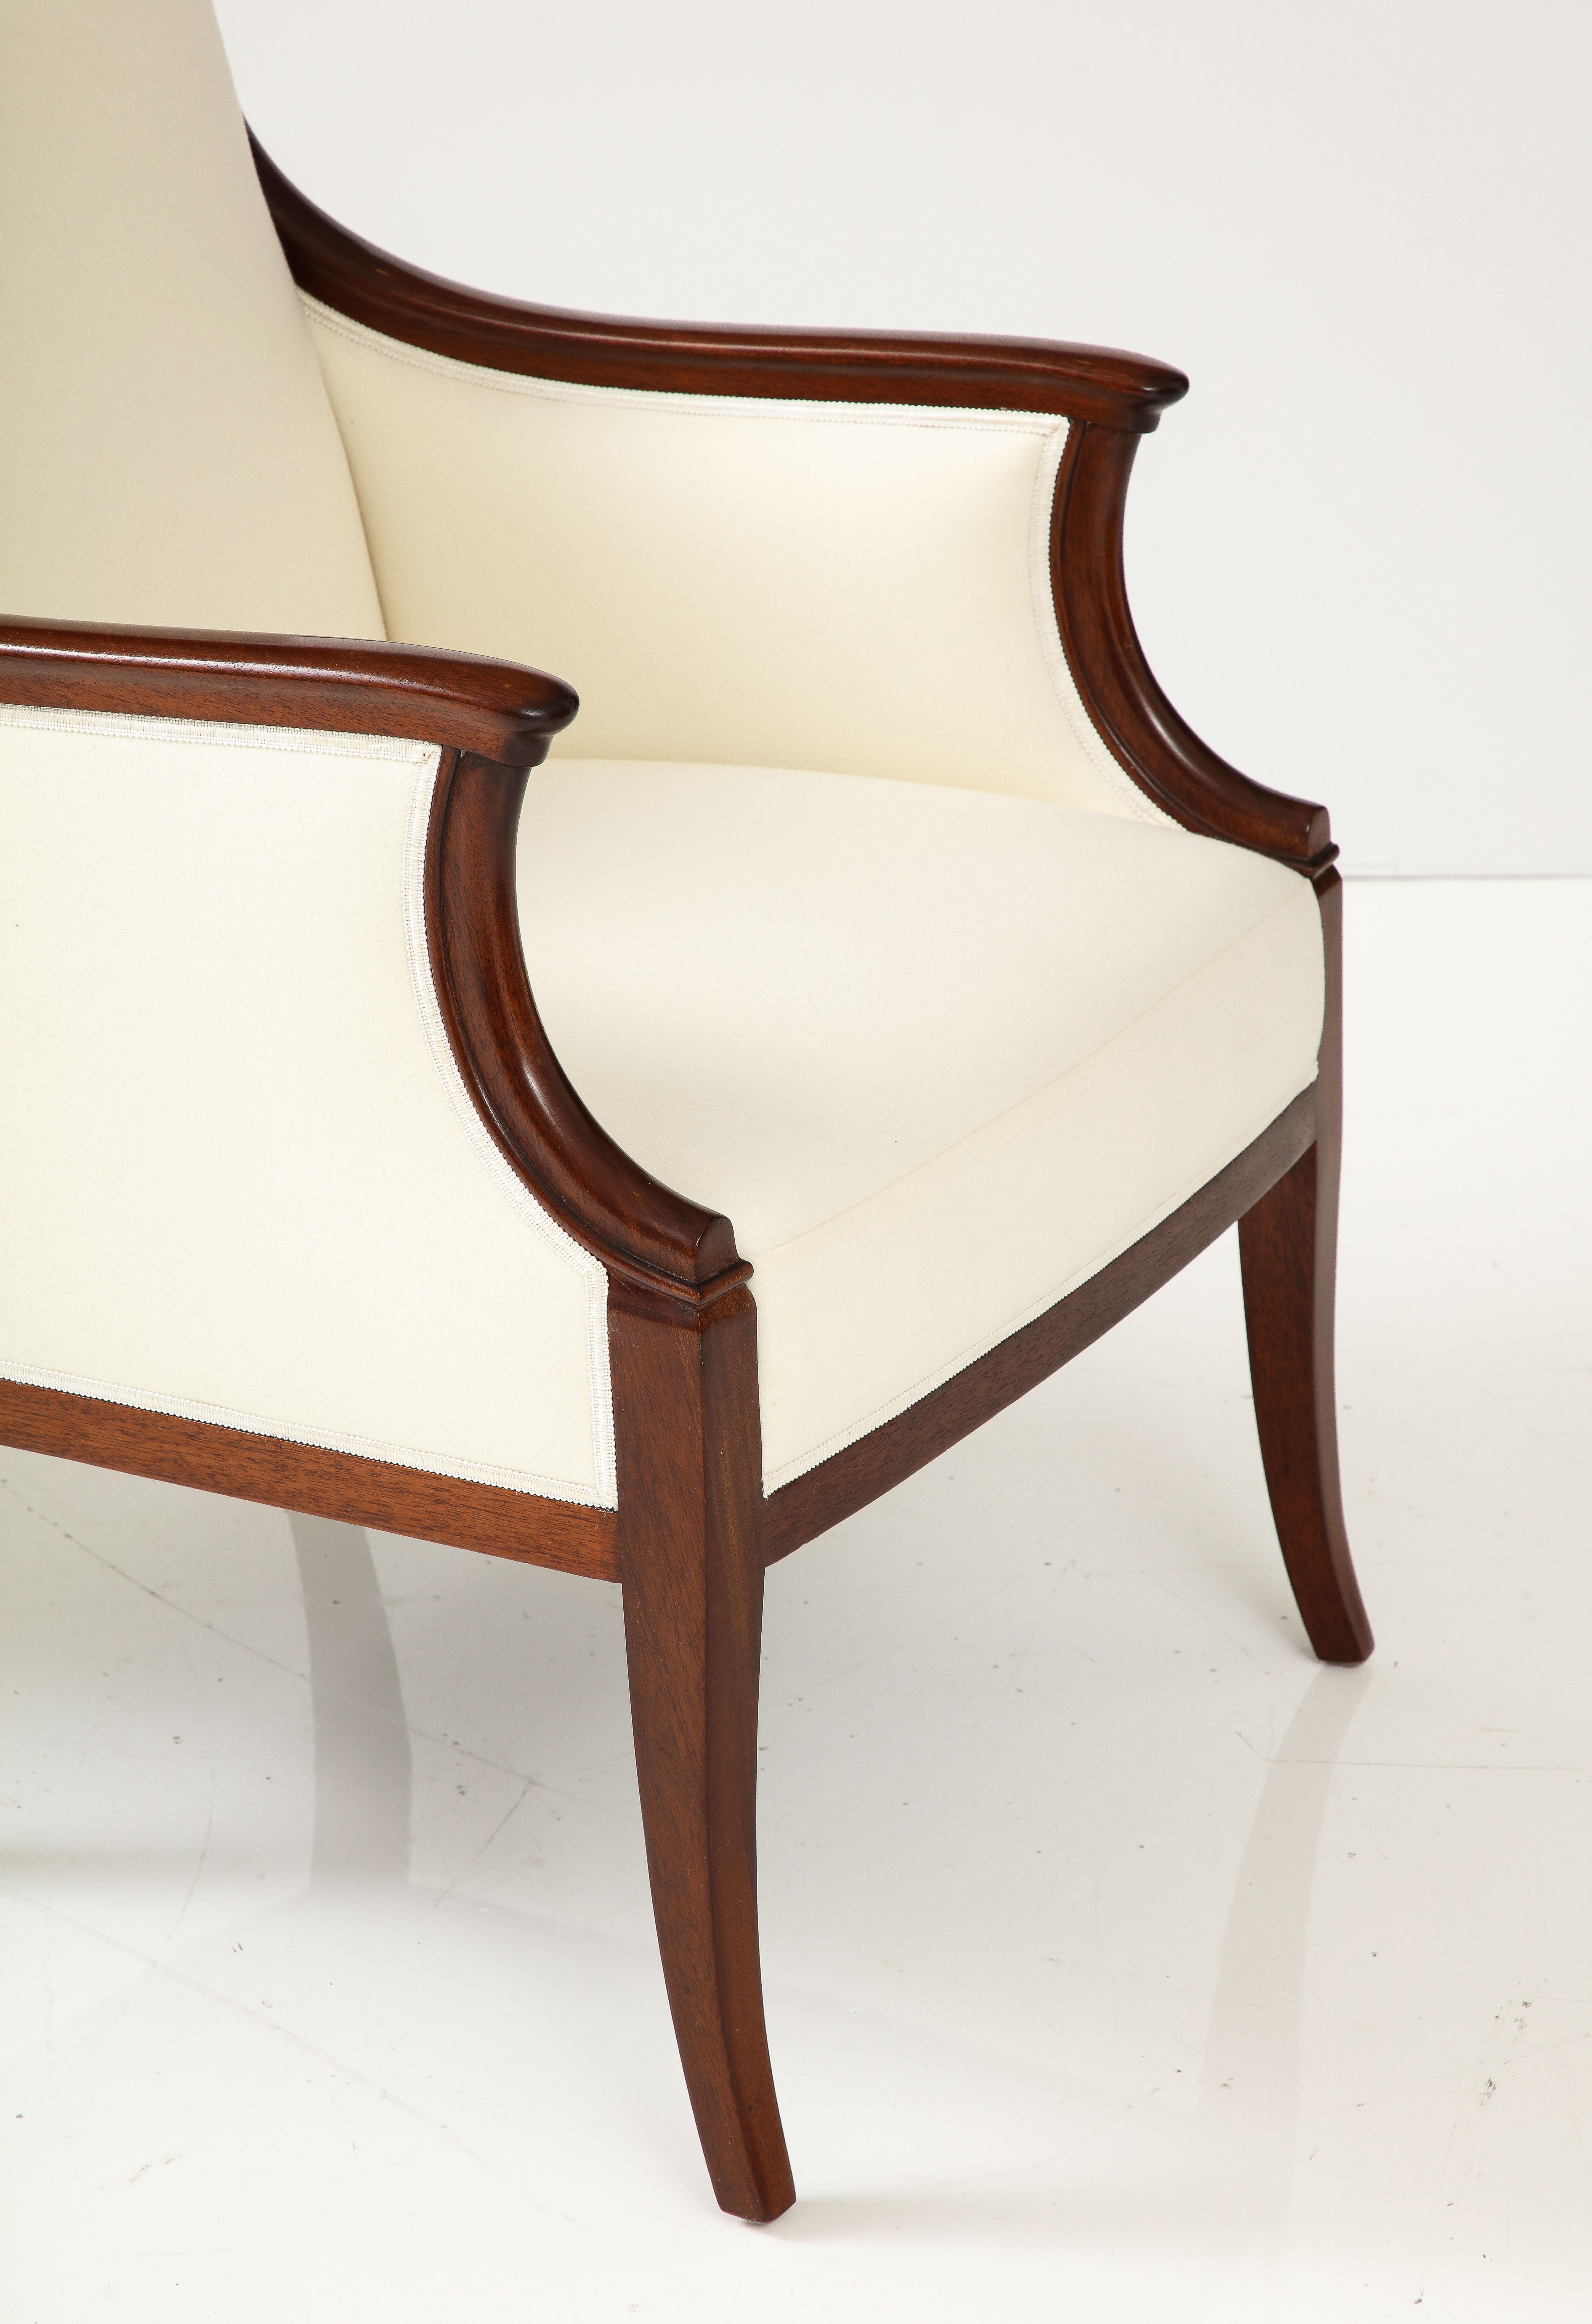 Mid-20th Century Pair of Frits Henningsen Mahogany Armchairs, circa 1940s For Sale